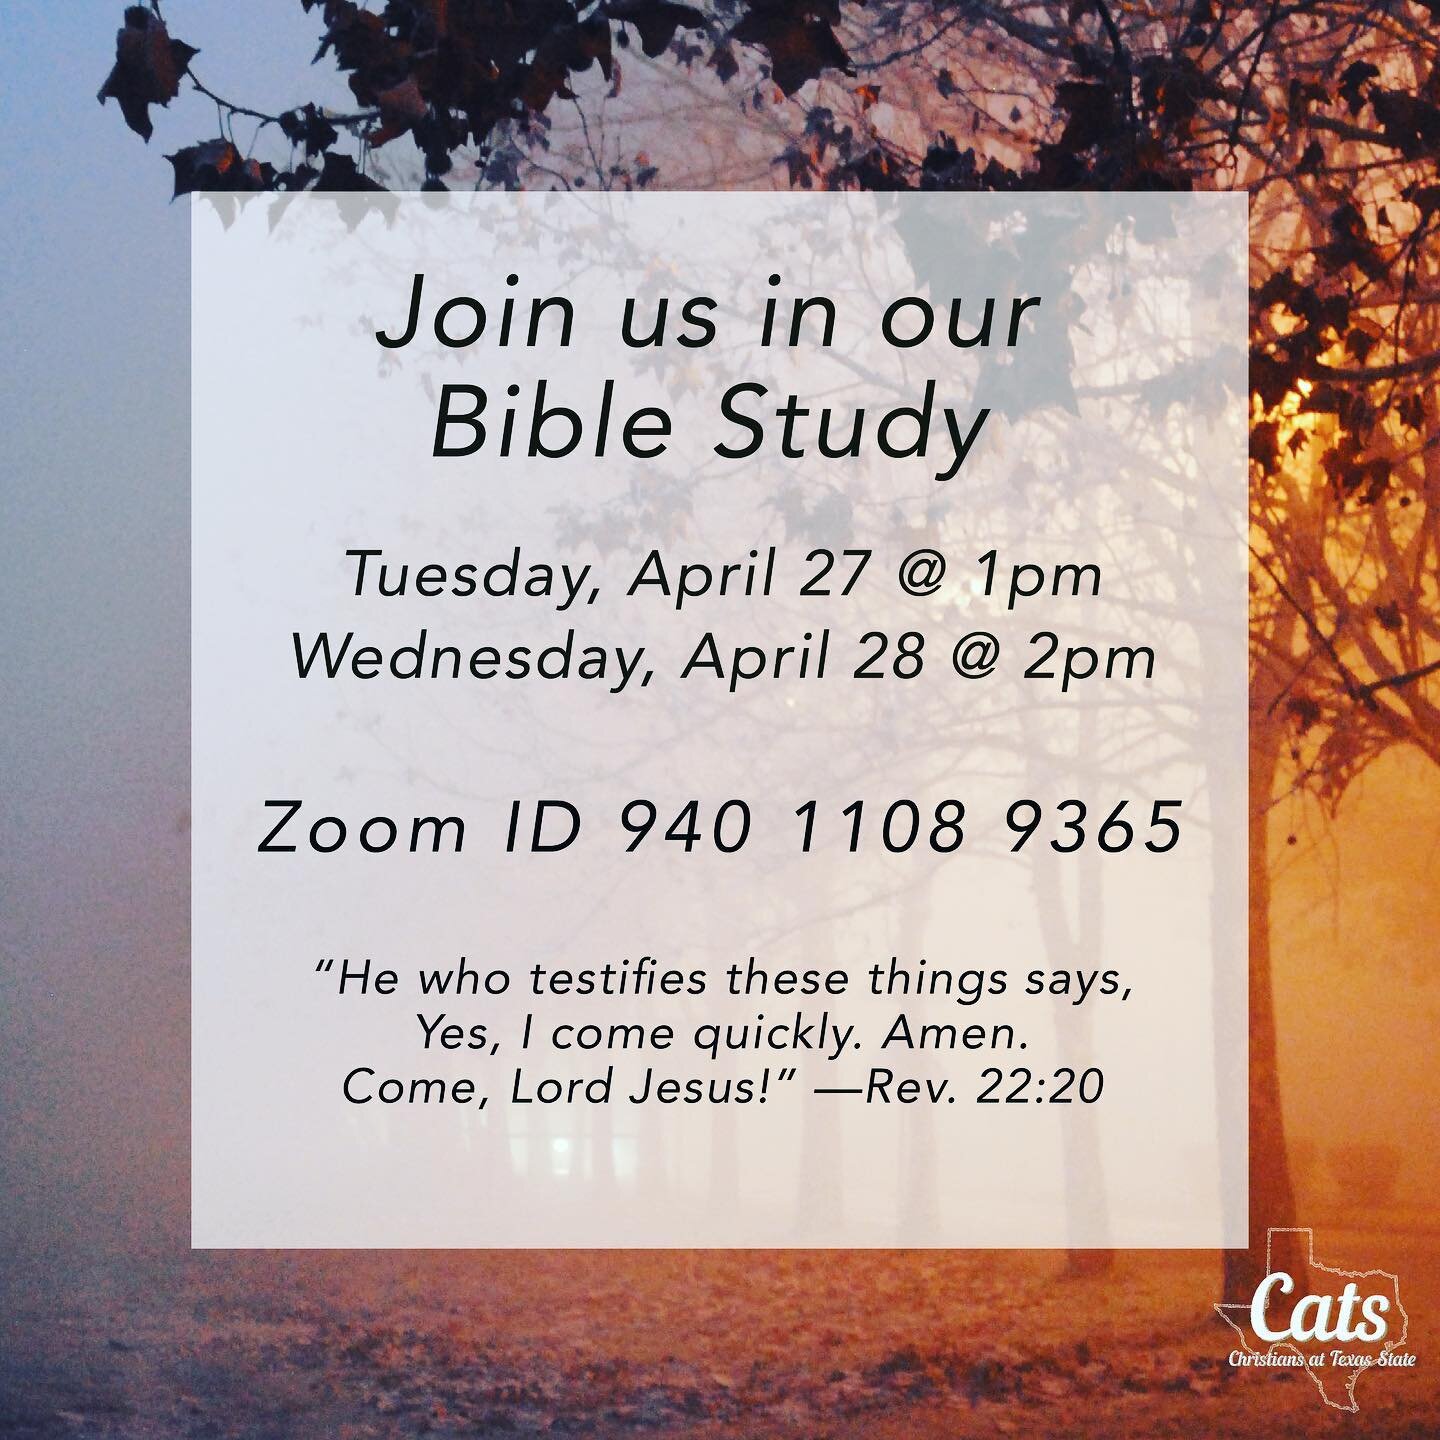 Join us for our last Bible Study this week as we read the last chapter of the Bible, Revelation 22! #thefirstandthelast #jesusisthefirst #jesusisthelast #jesus #revelation #bible #biblestudy #txst24